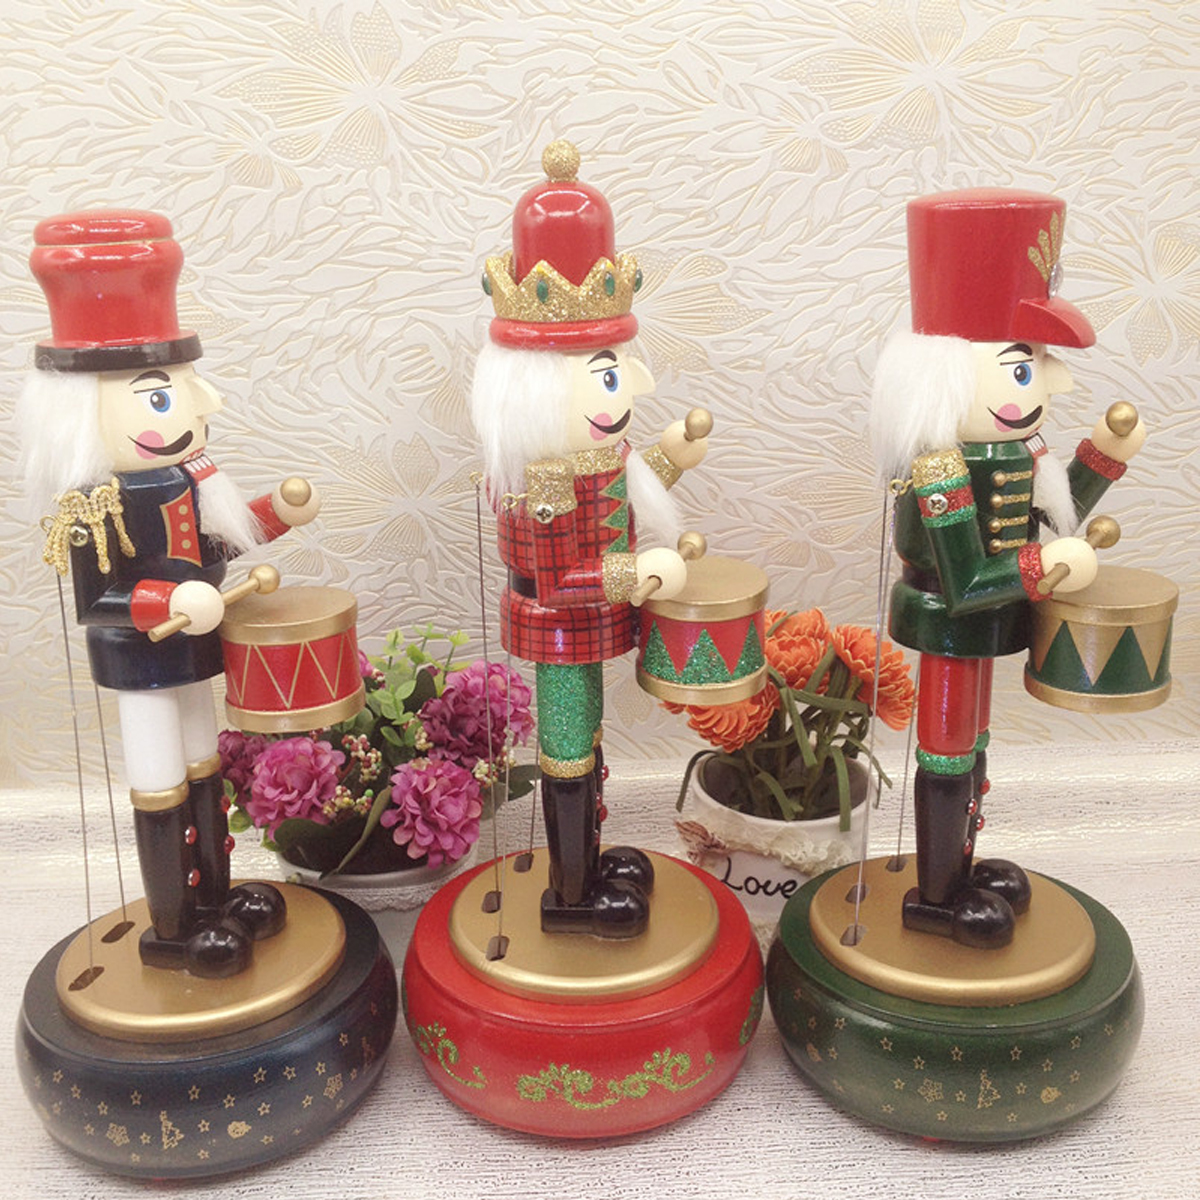 32CM-Wooden-Guard-Nutcracker-Soldier-Toy-Music-Box-Christmas-Decorations-Xmas-Gift-1605612-4